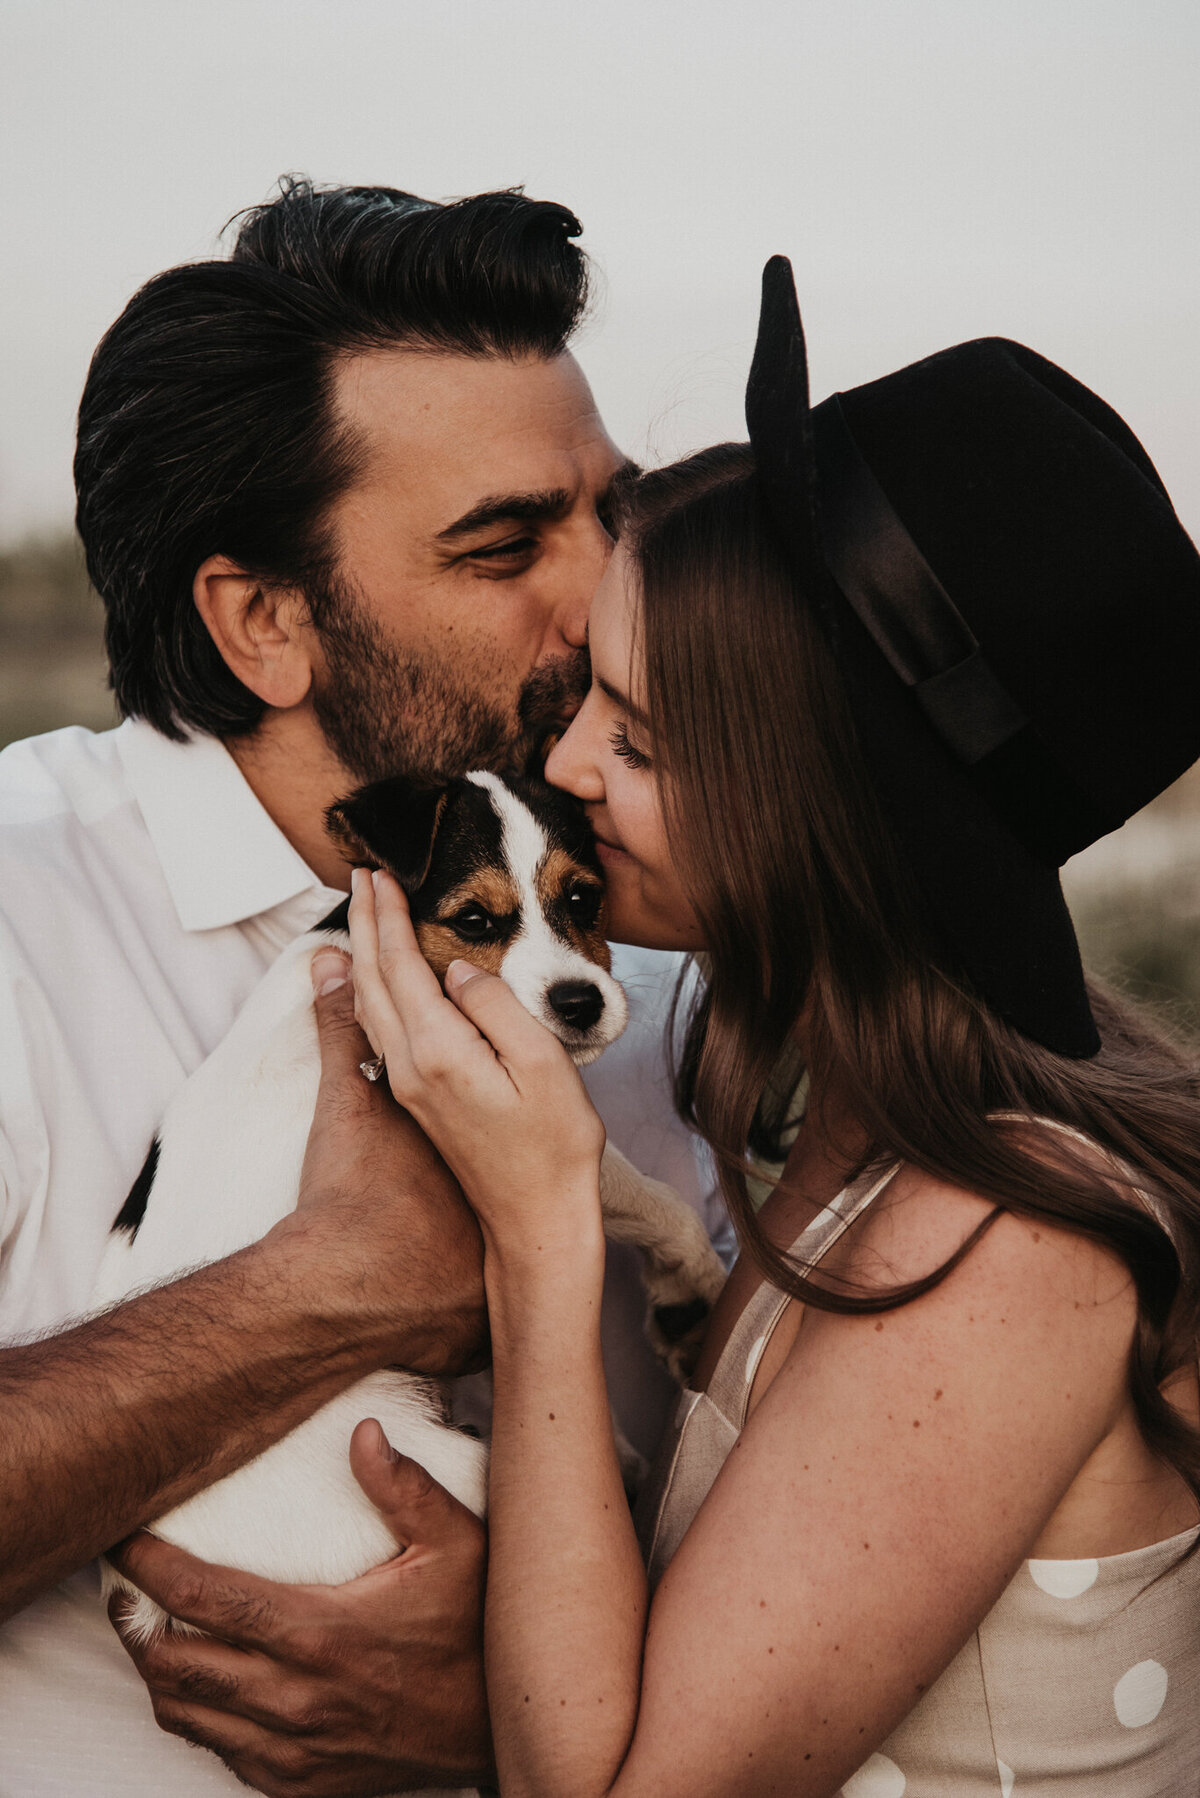 Adorable engagement session inspiration, trendy, modern couple snuggling with dog.